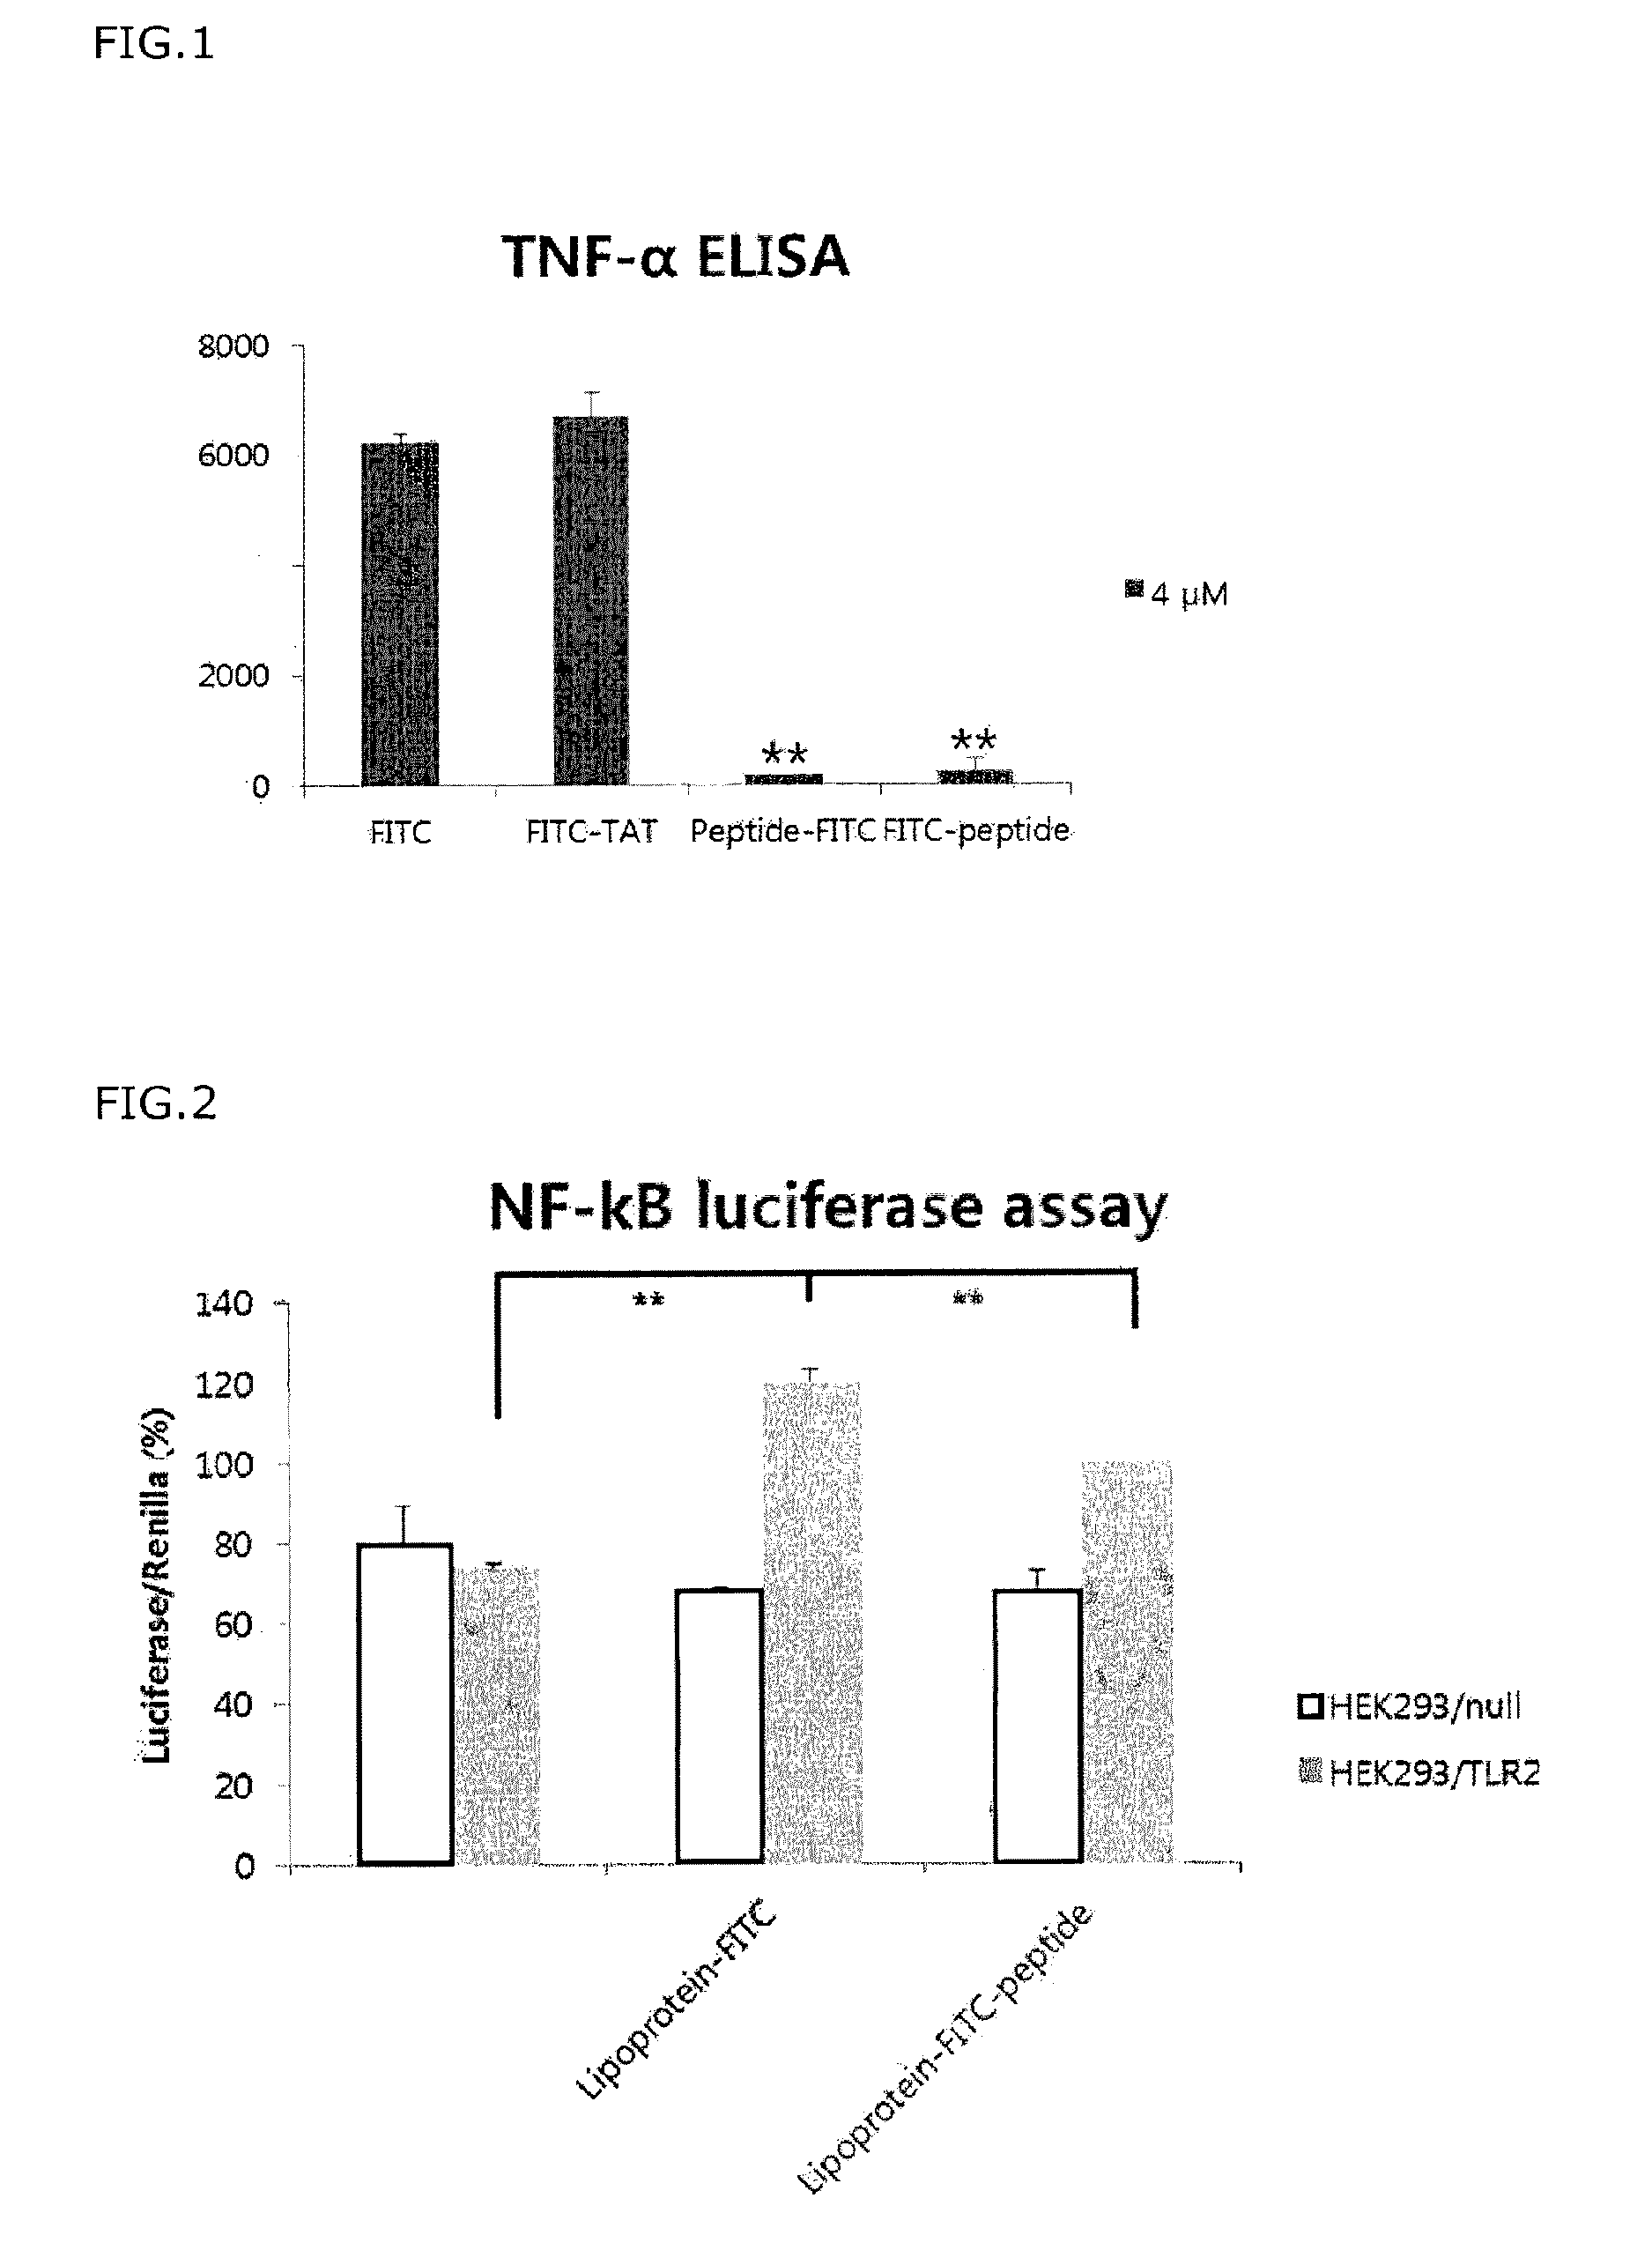 Anti-inflammatory peptides and composition comprising the same